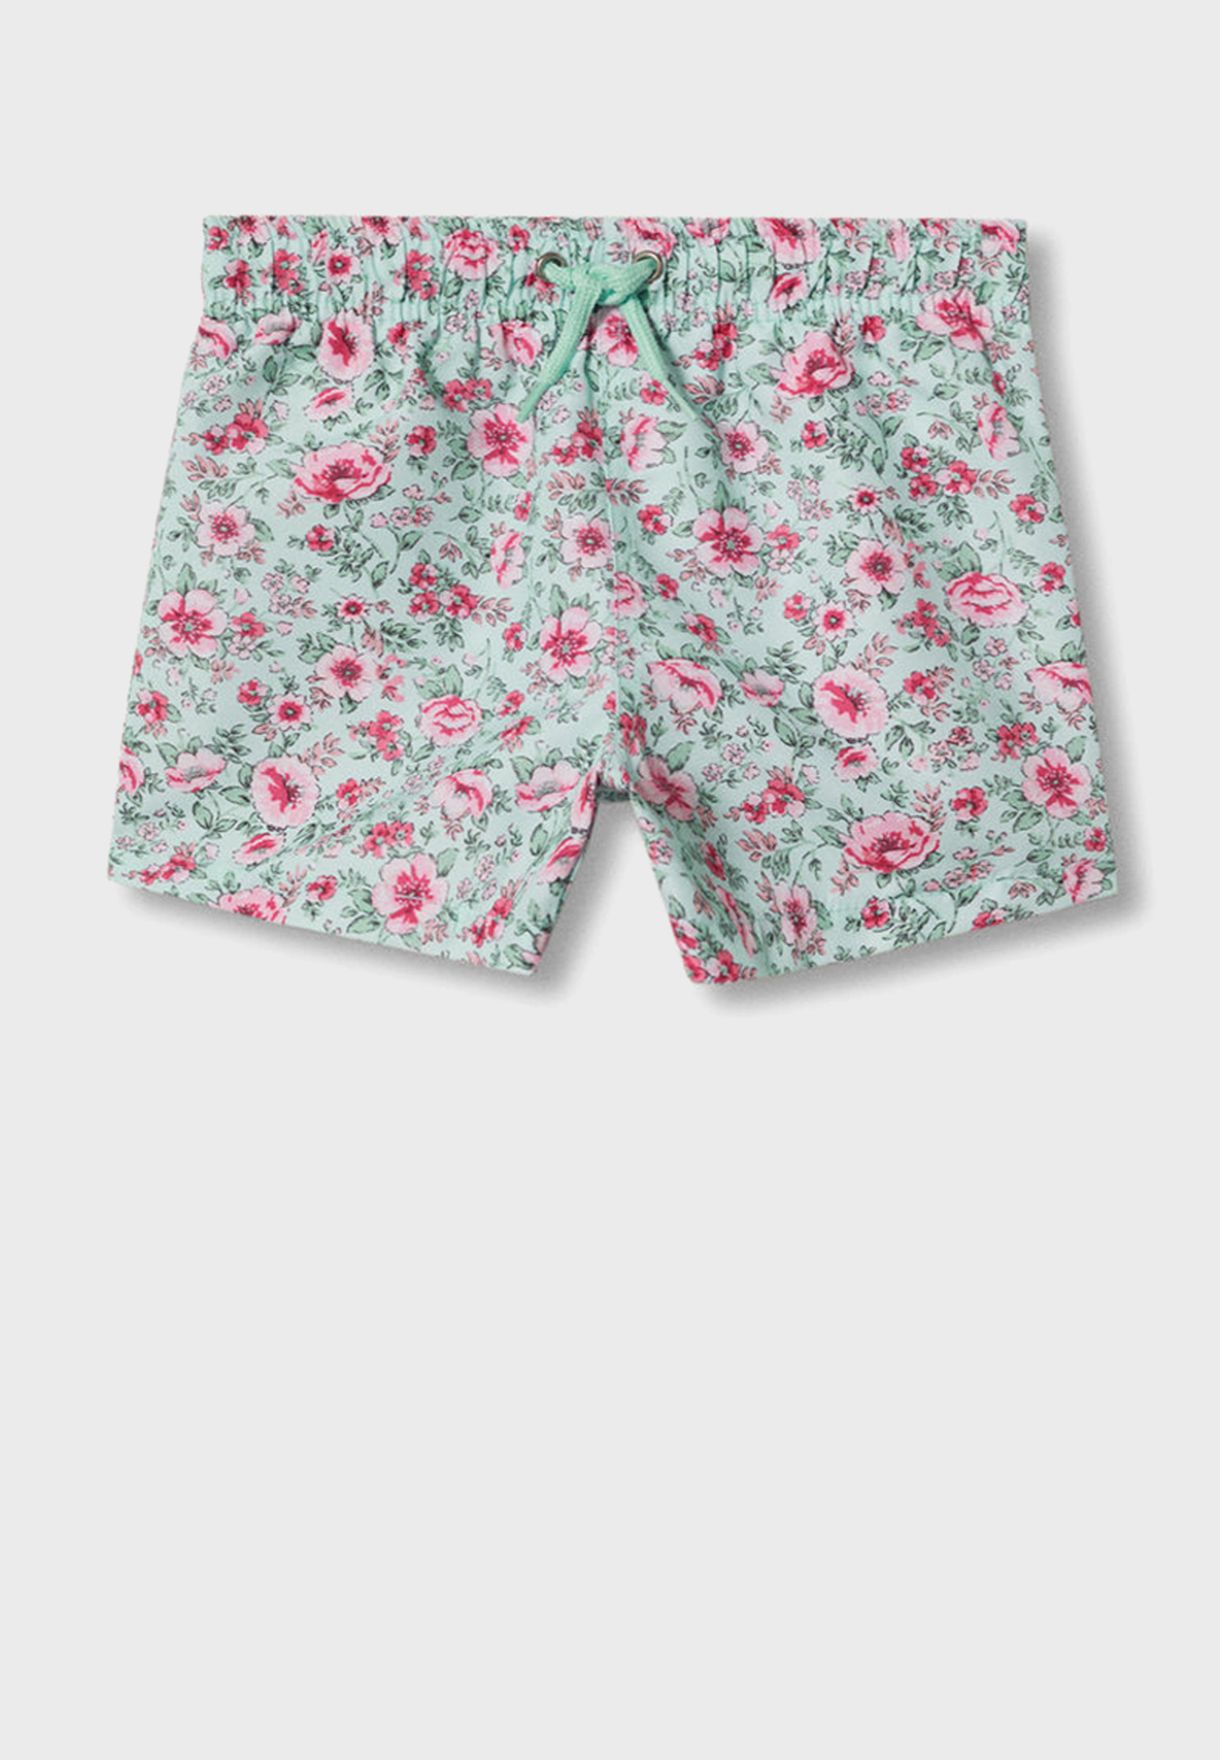 Infant Floral Print Swims Shorts